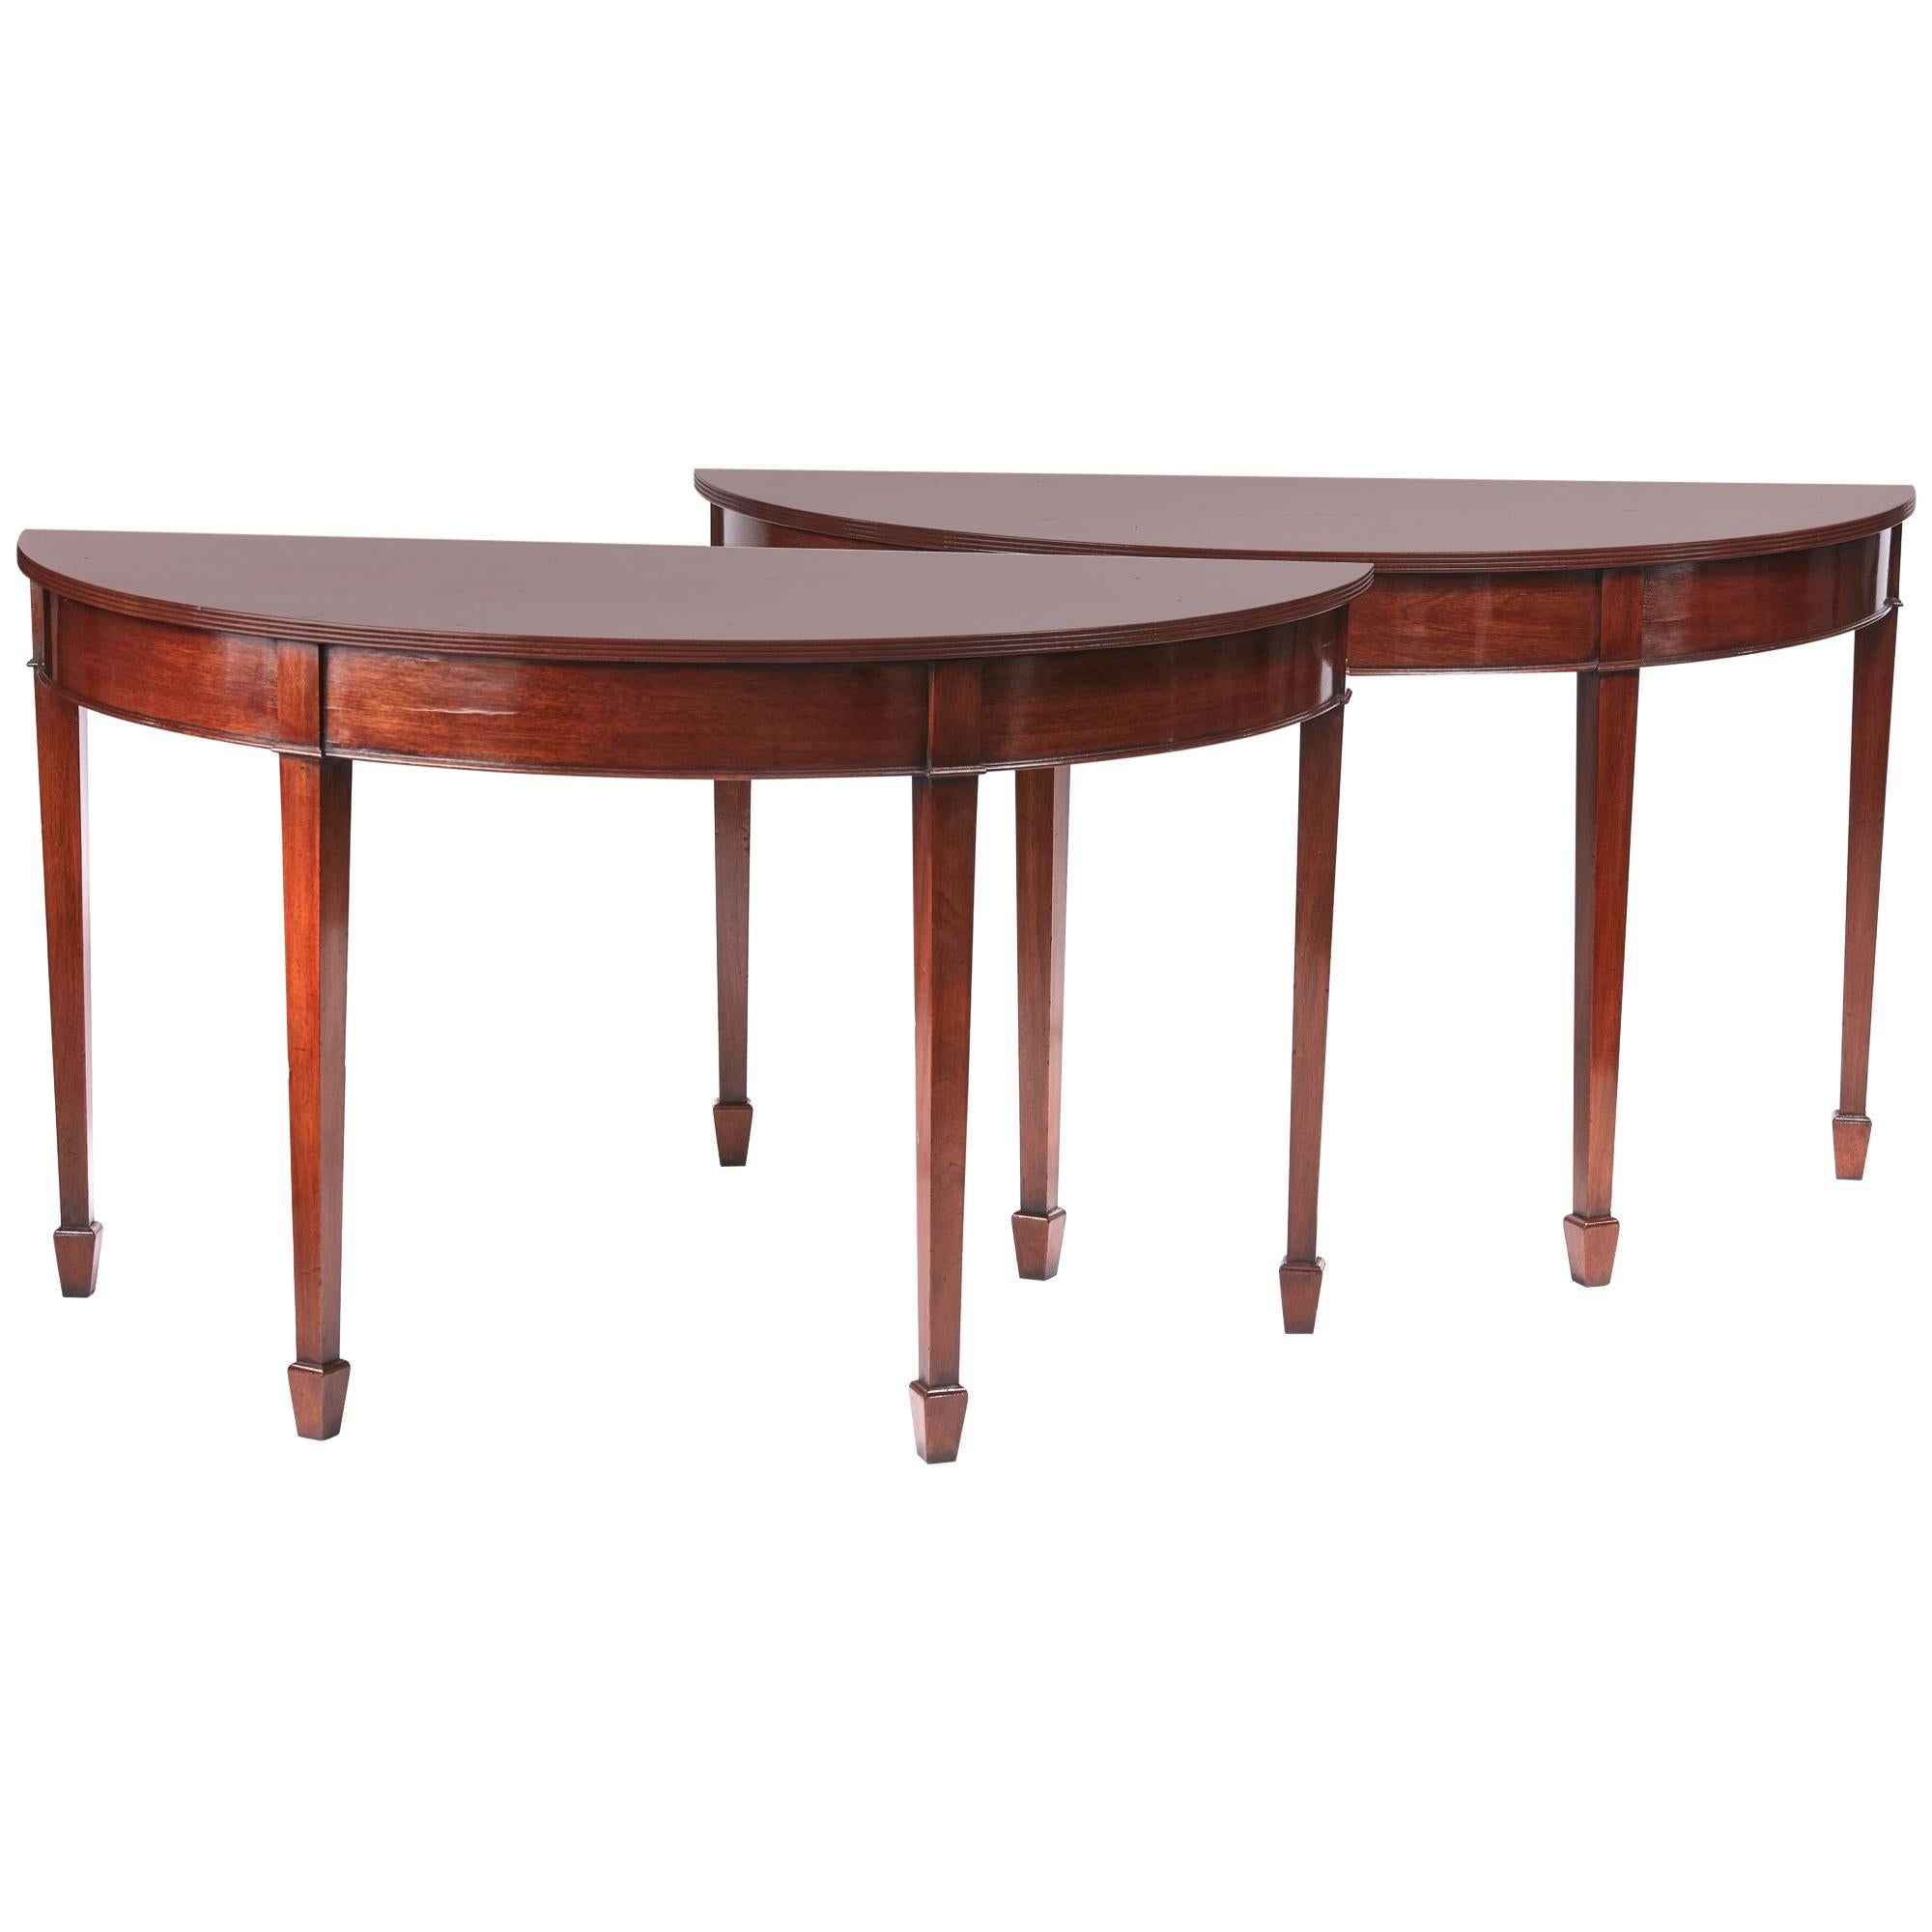 Pair of Edwardian Mahogany Demilune Console Tables